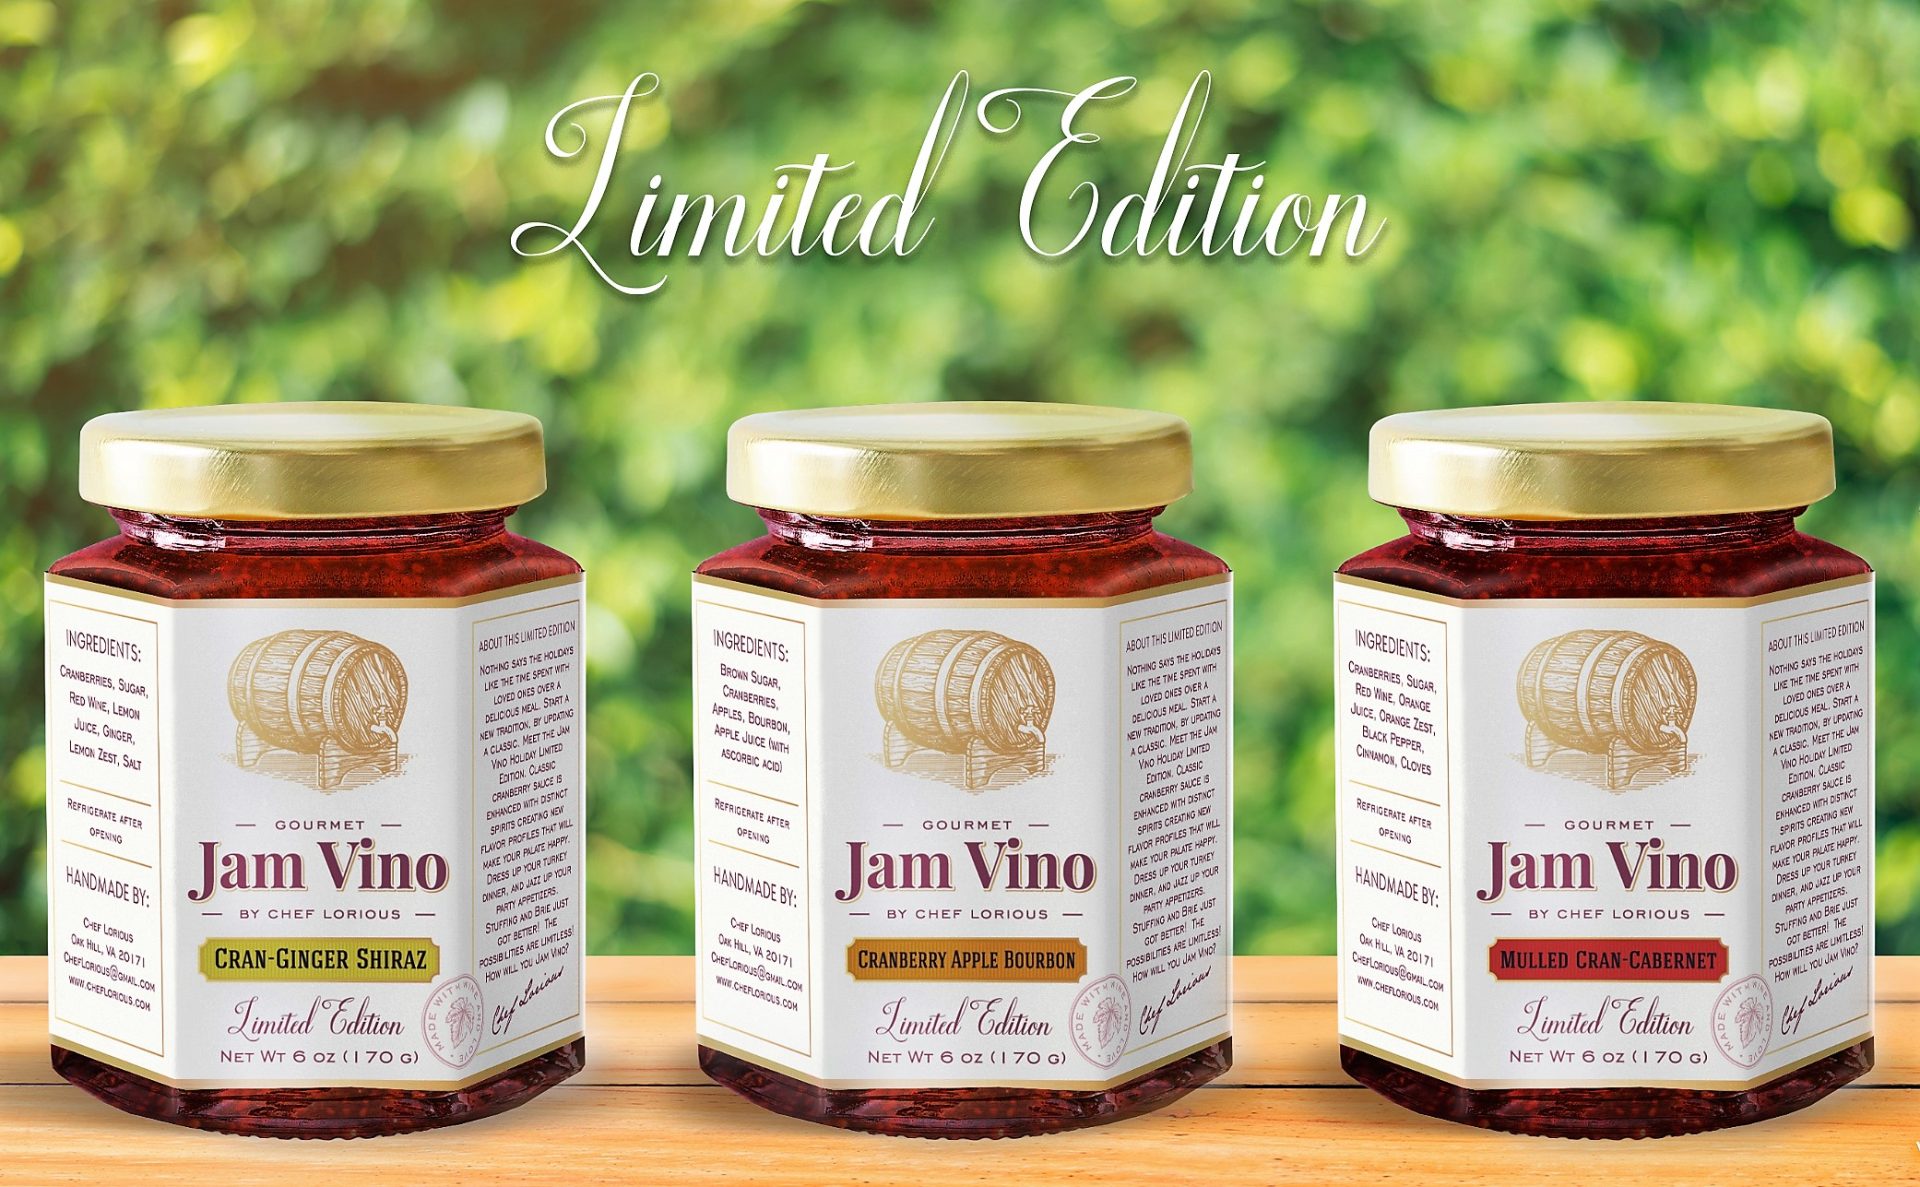 Three jars of jam are shown on a table.